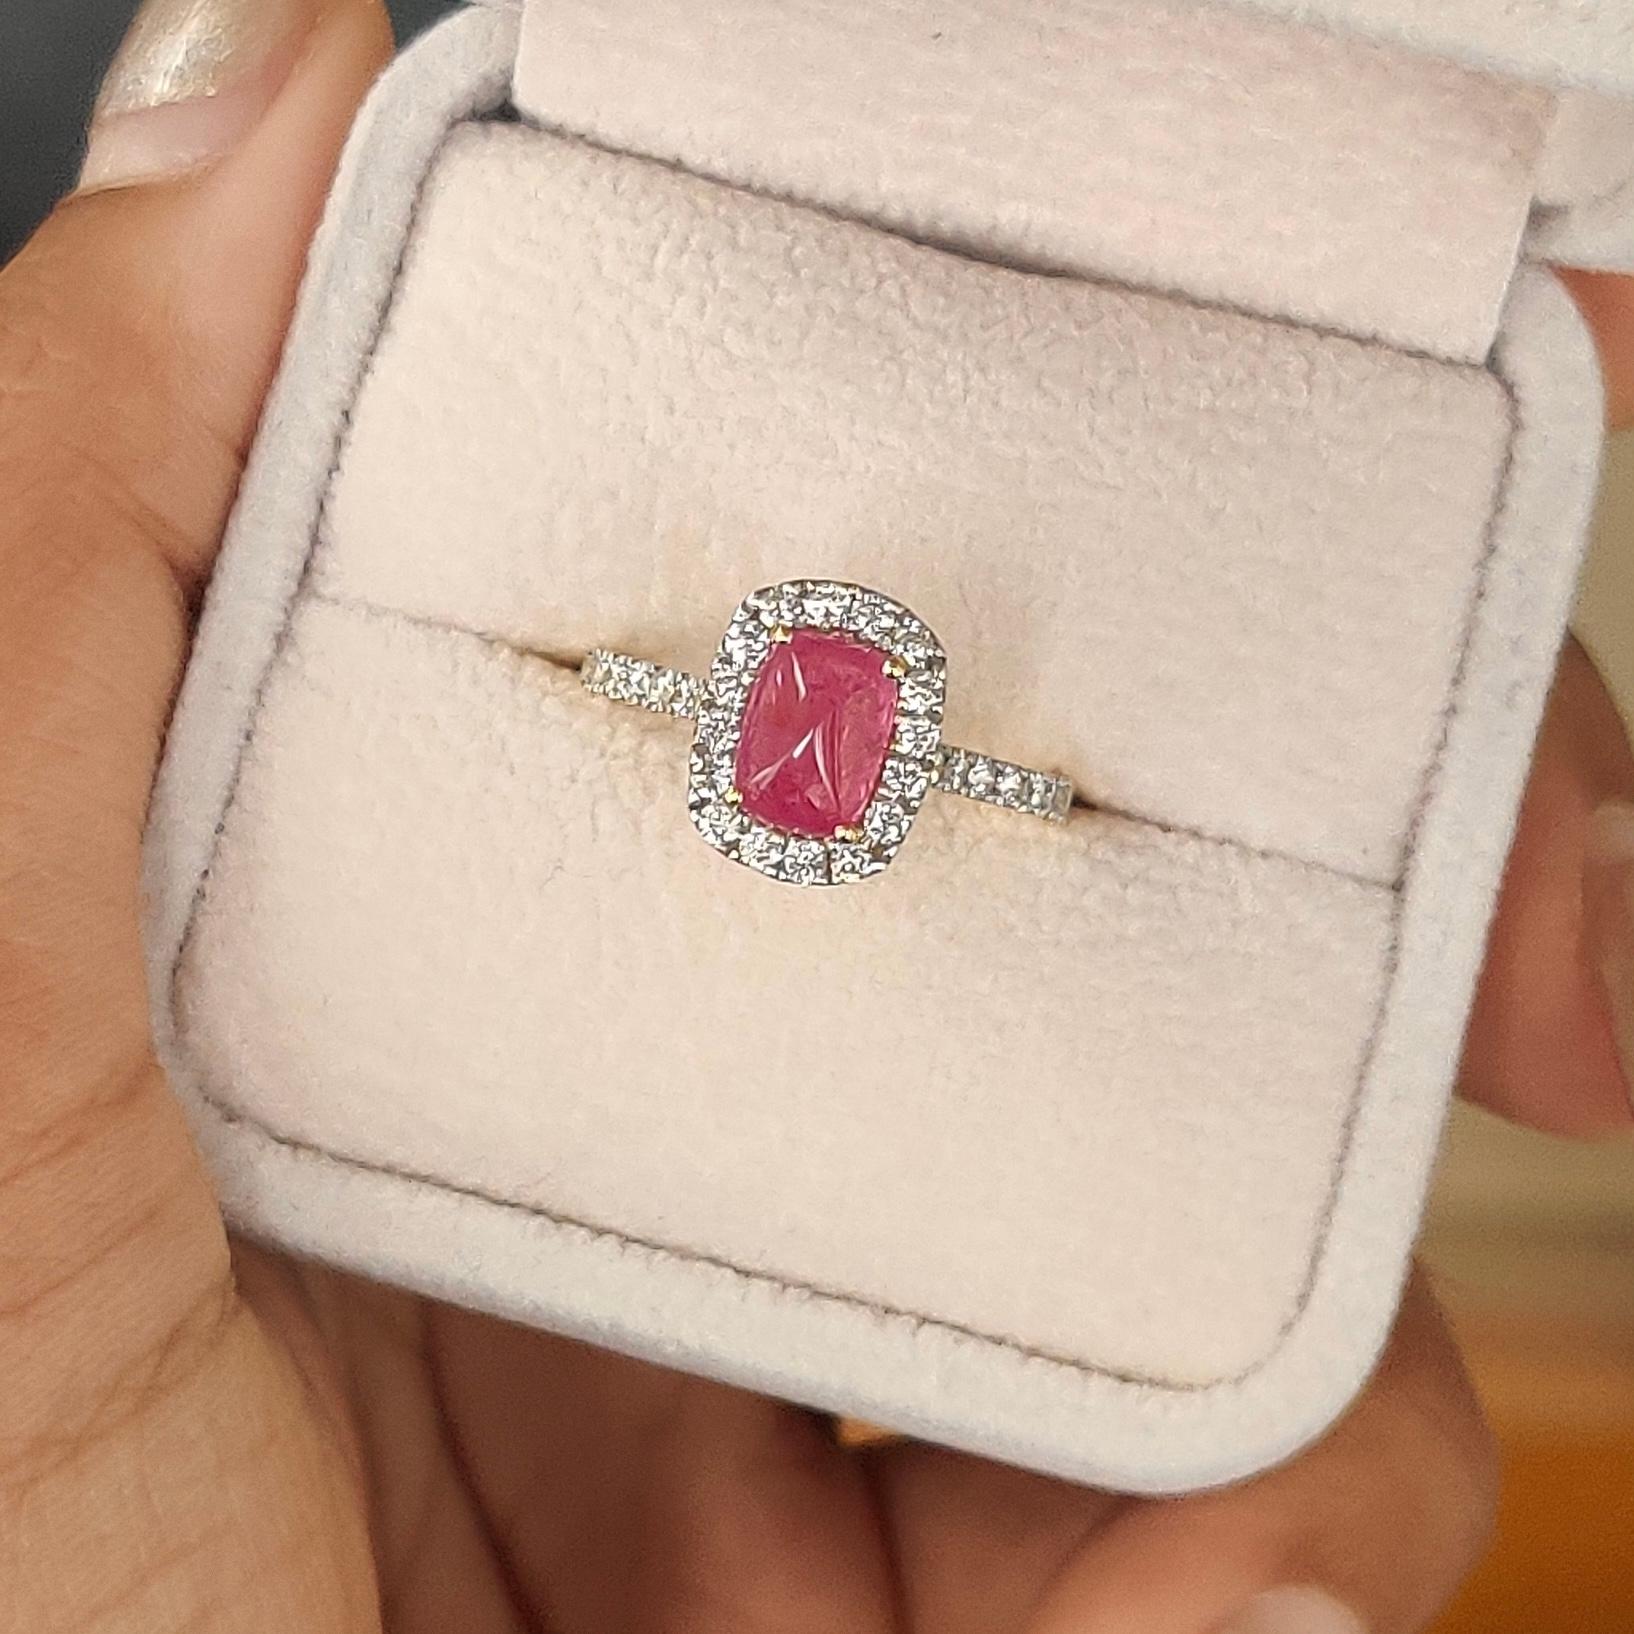 Radiating timeless elegance, this extraordinary piece has been specially designed to accentuate the mesmerizing beauty of this mesmerizing pink ruby. 

The ruby, a regal emblem of rich sophistication, boasts a captivating vivid pink hue and a total